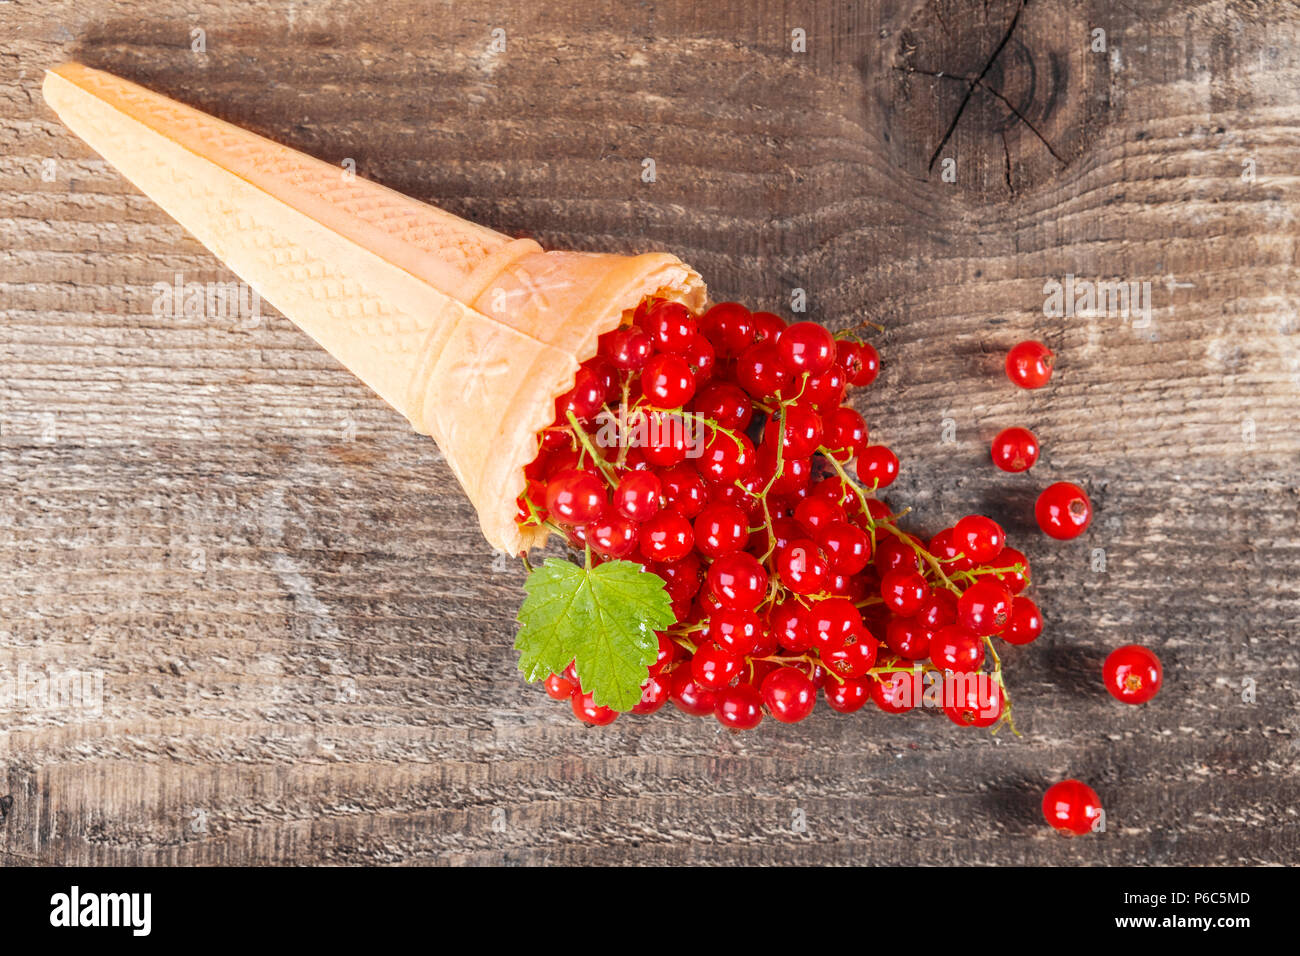 Red currant fruits in ice cream cone on wooden table. Focus on leaf. Stock Photo